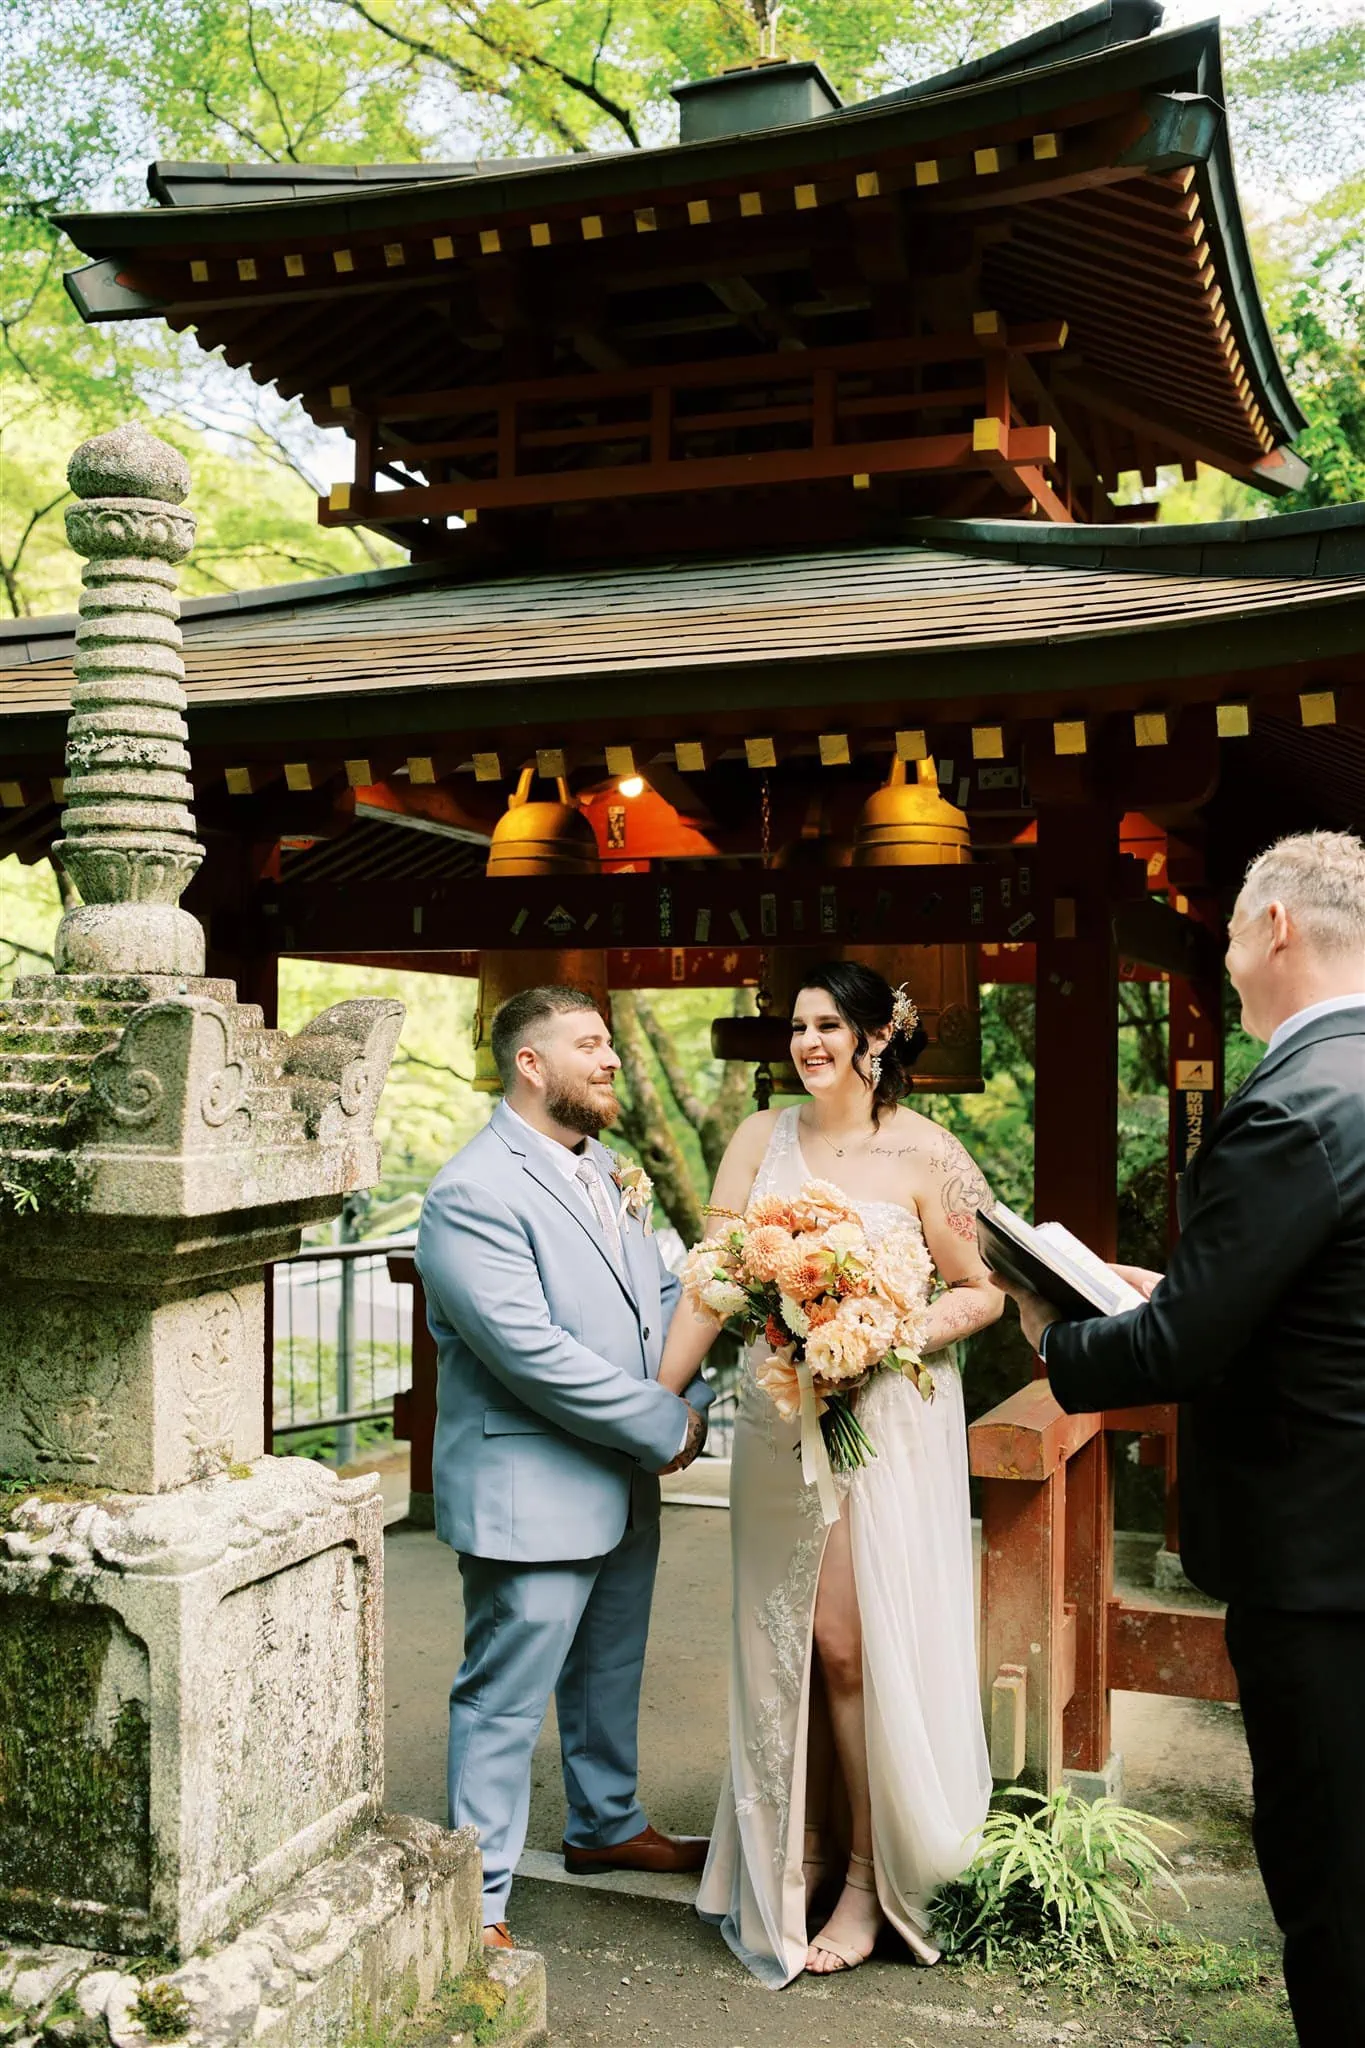 Kyoto Tokyo Japan Elopement Wedding Photographer, Planner & Videographer | A photographer captures a bride and groom's Japan elopement ceremony in front of a Japanese pagoda.